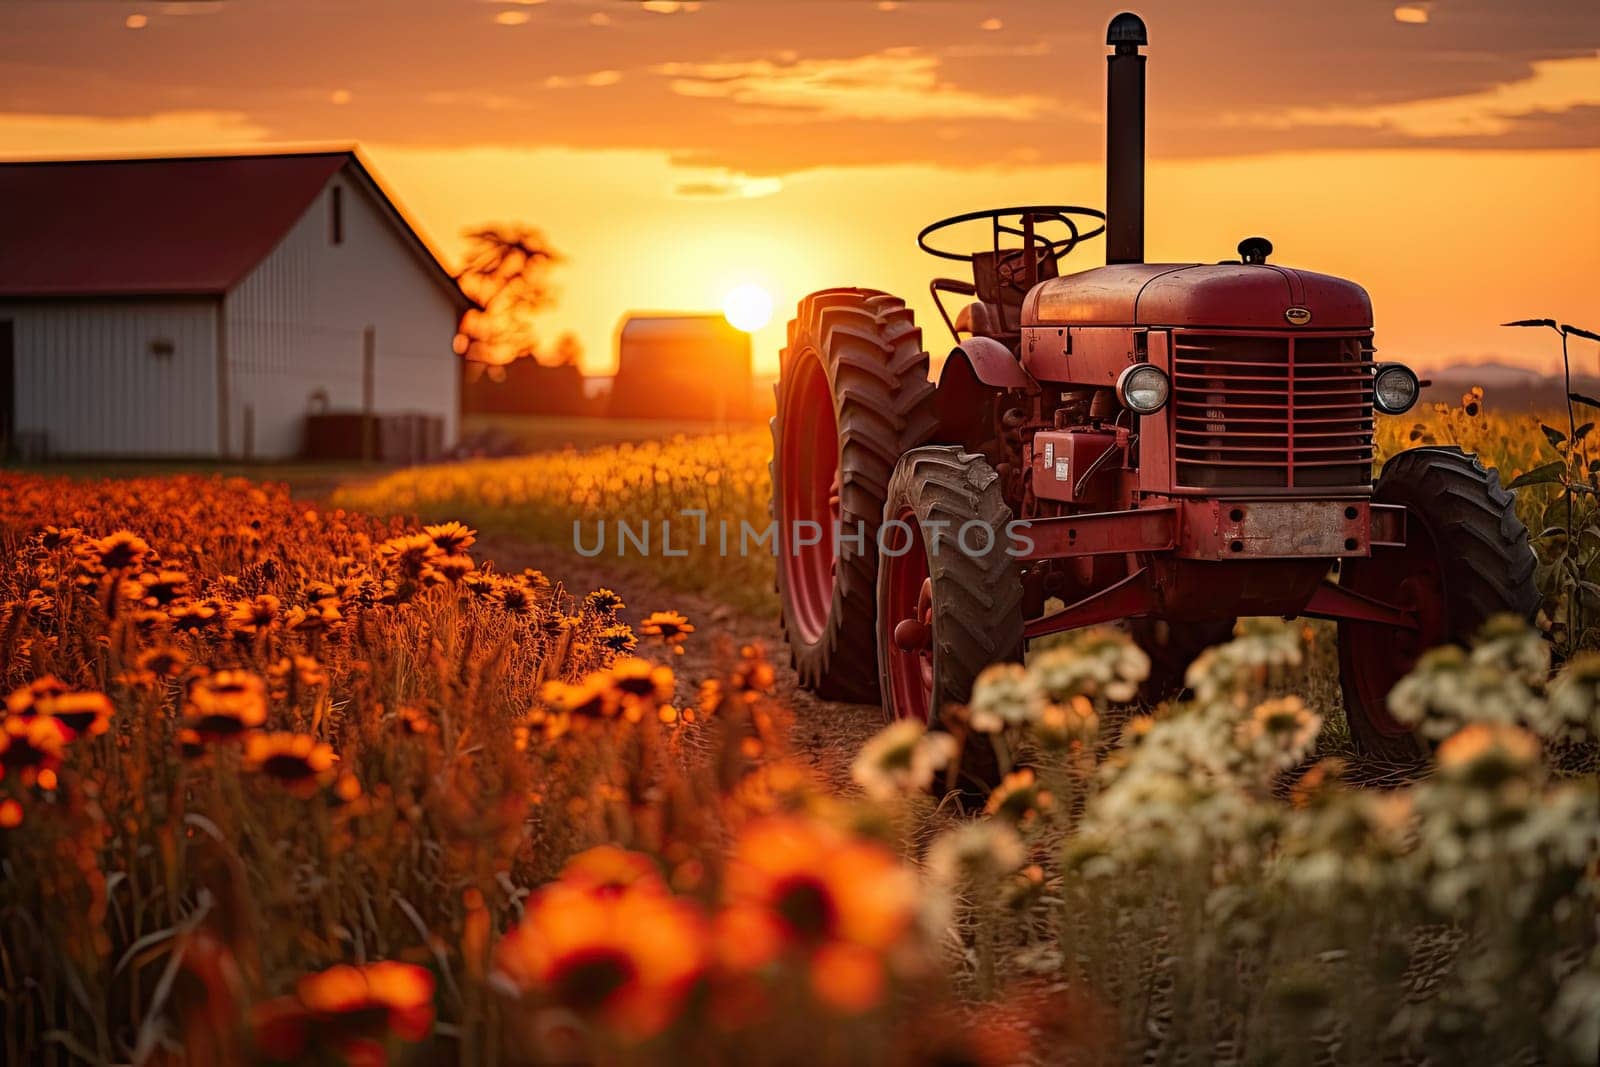 A tractor in a field with a sunset in the background by golibtolibov